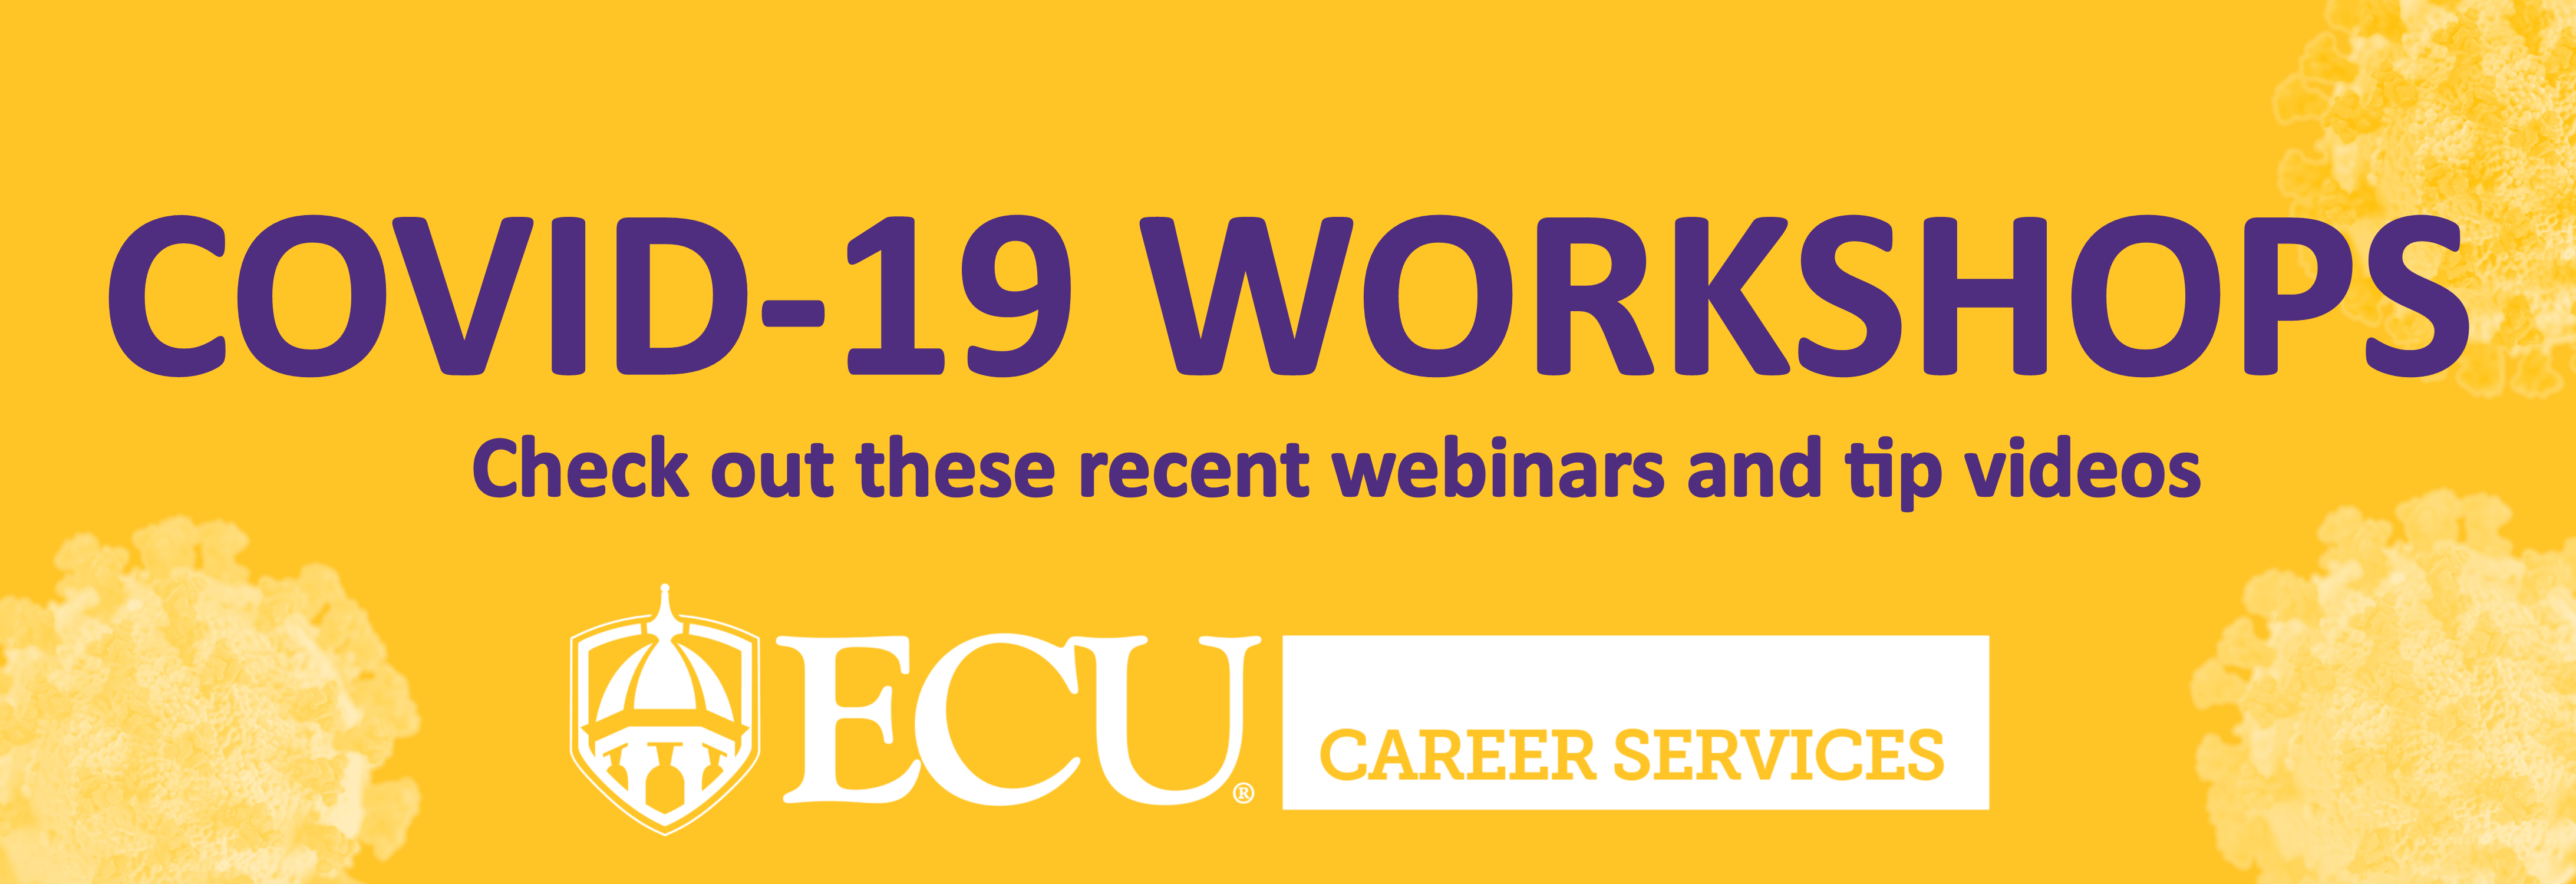 COVID-19 Workshops - check out these recent webinars and tip videos